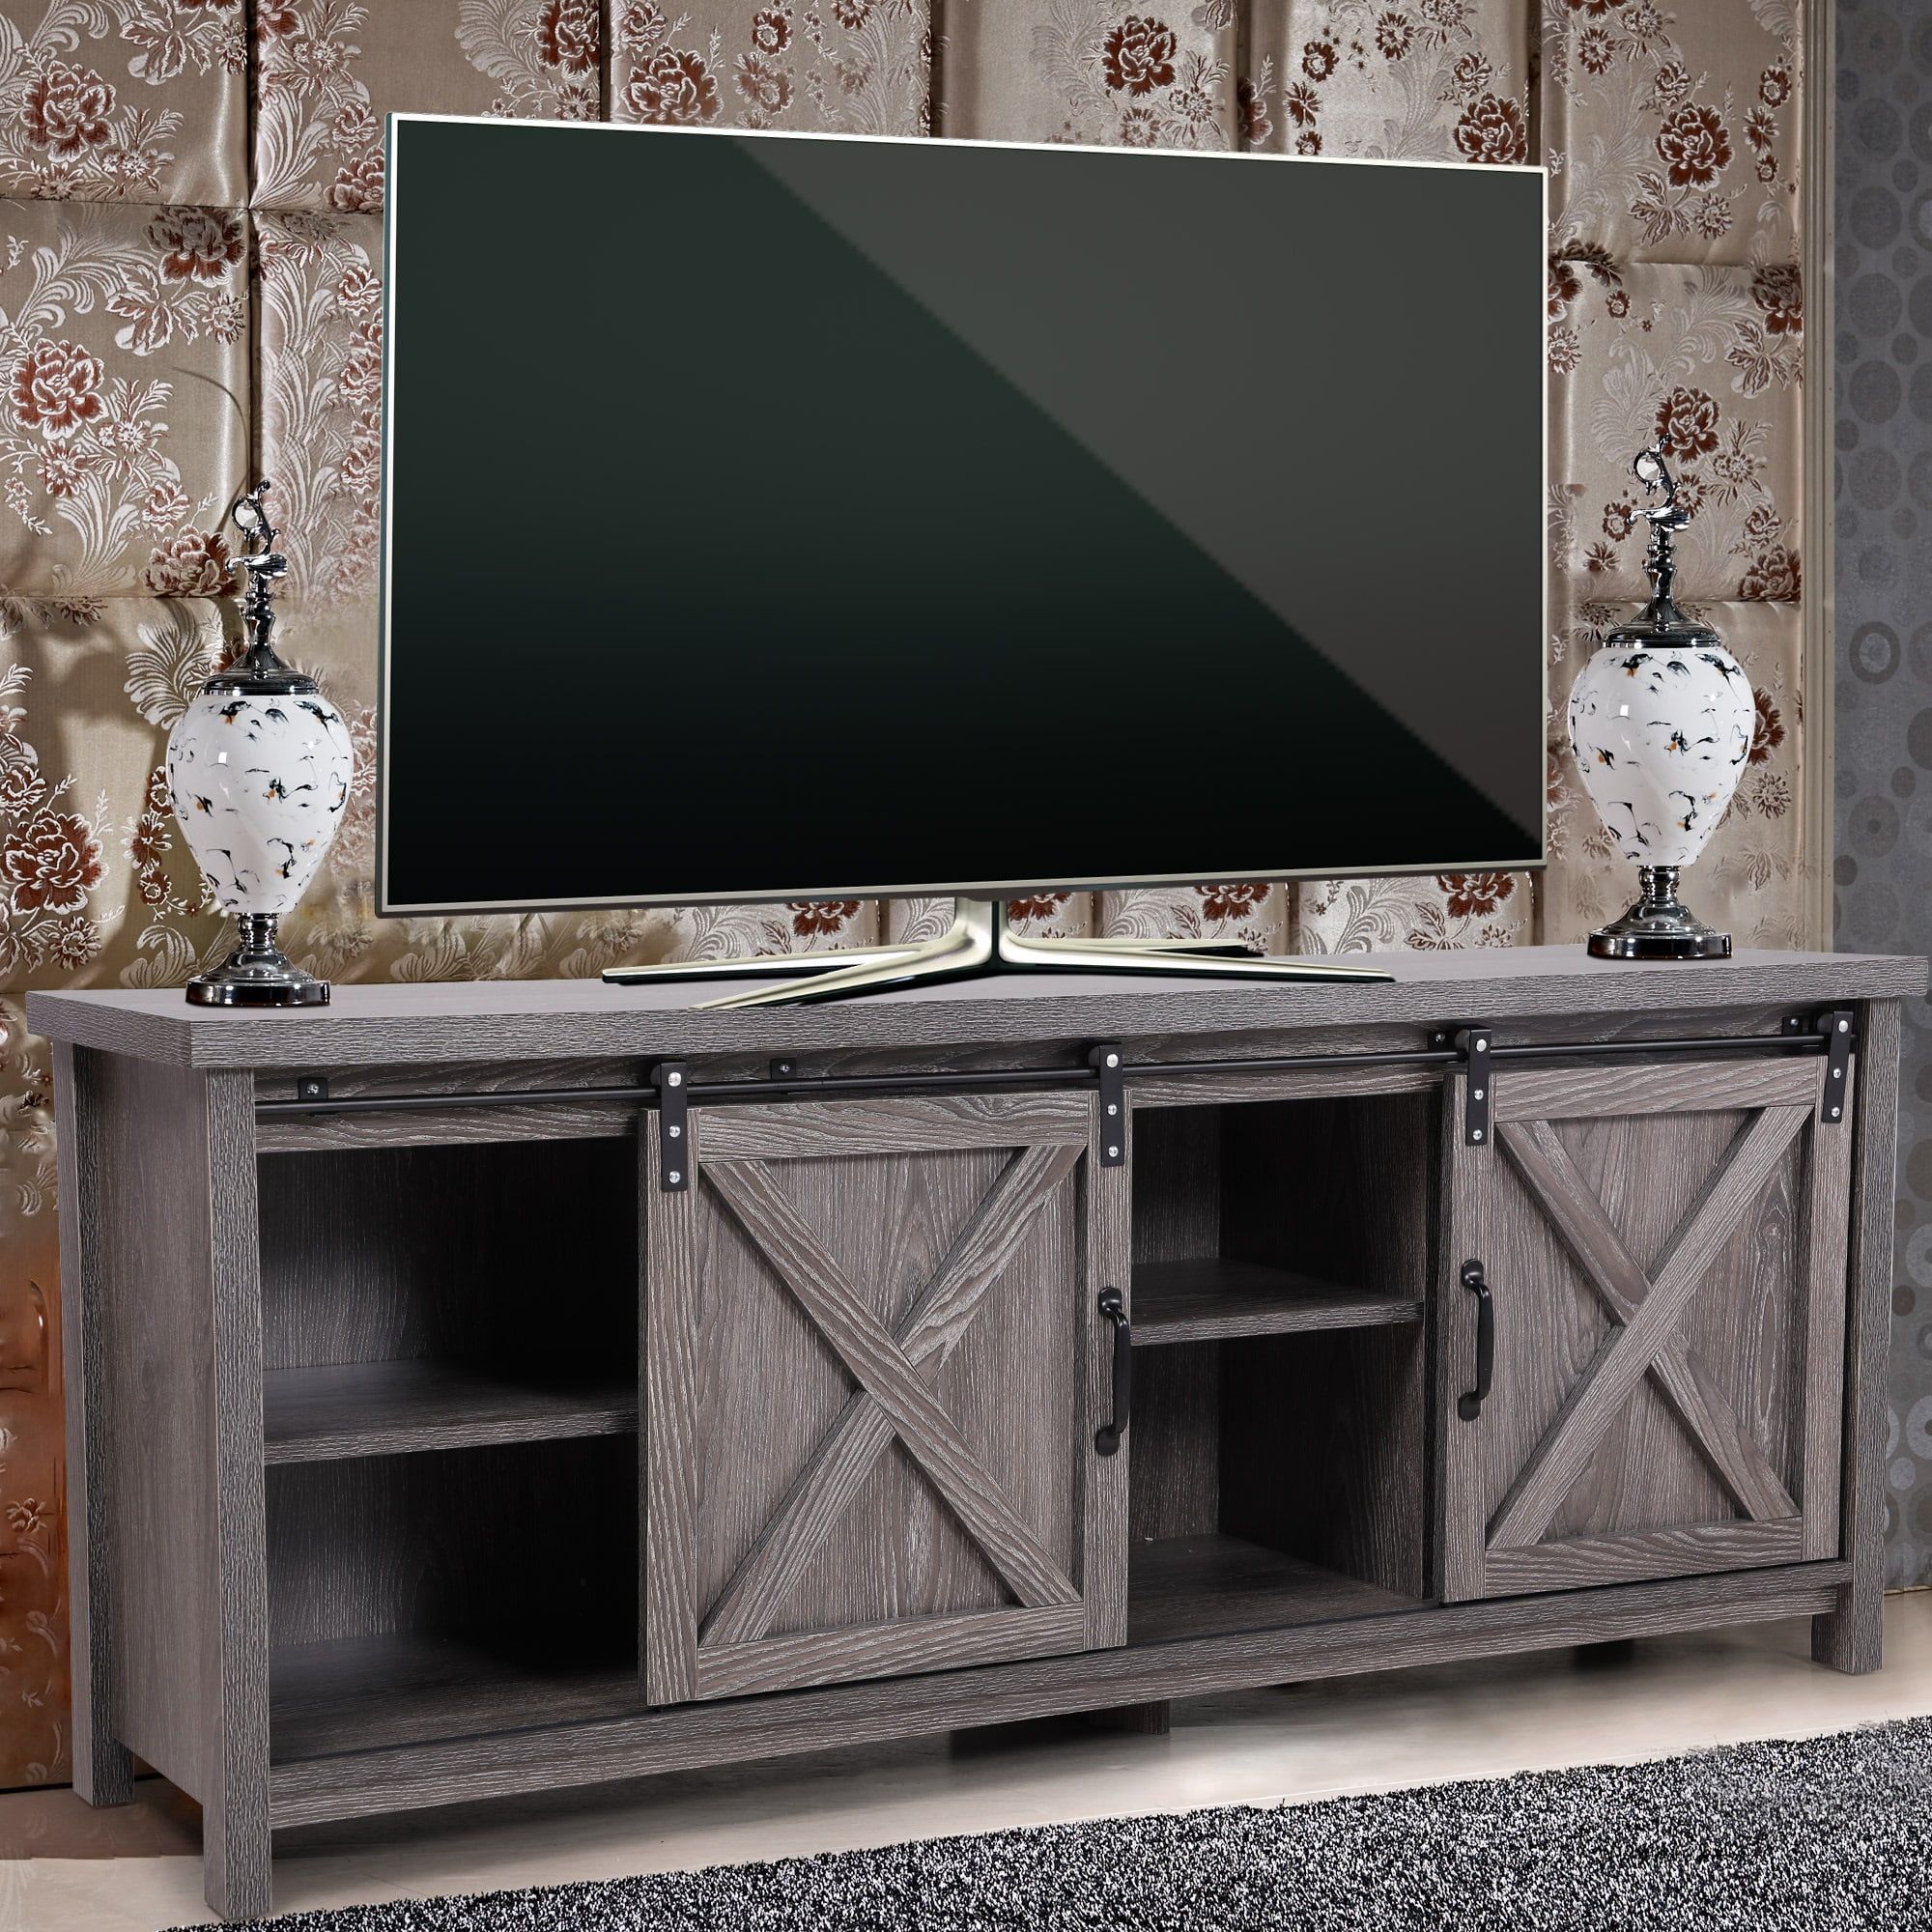 Jaxpety 58" Farmhouse Sliding Barn Door Tv Stand For Tvs Up To 65 For Farmhouse Tv Stands (Gallery 10 of 20)